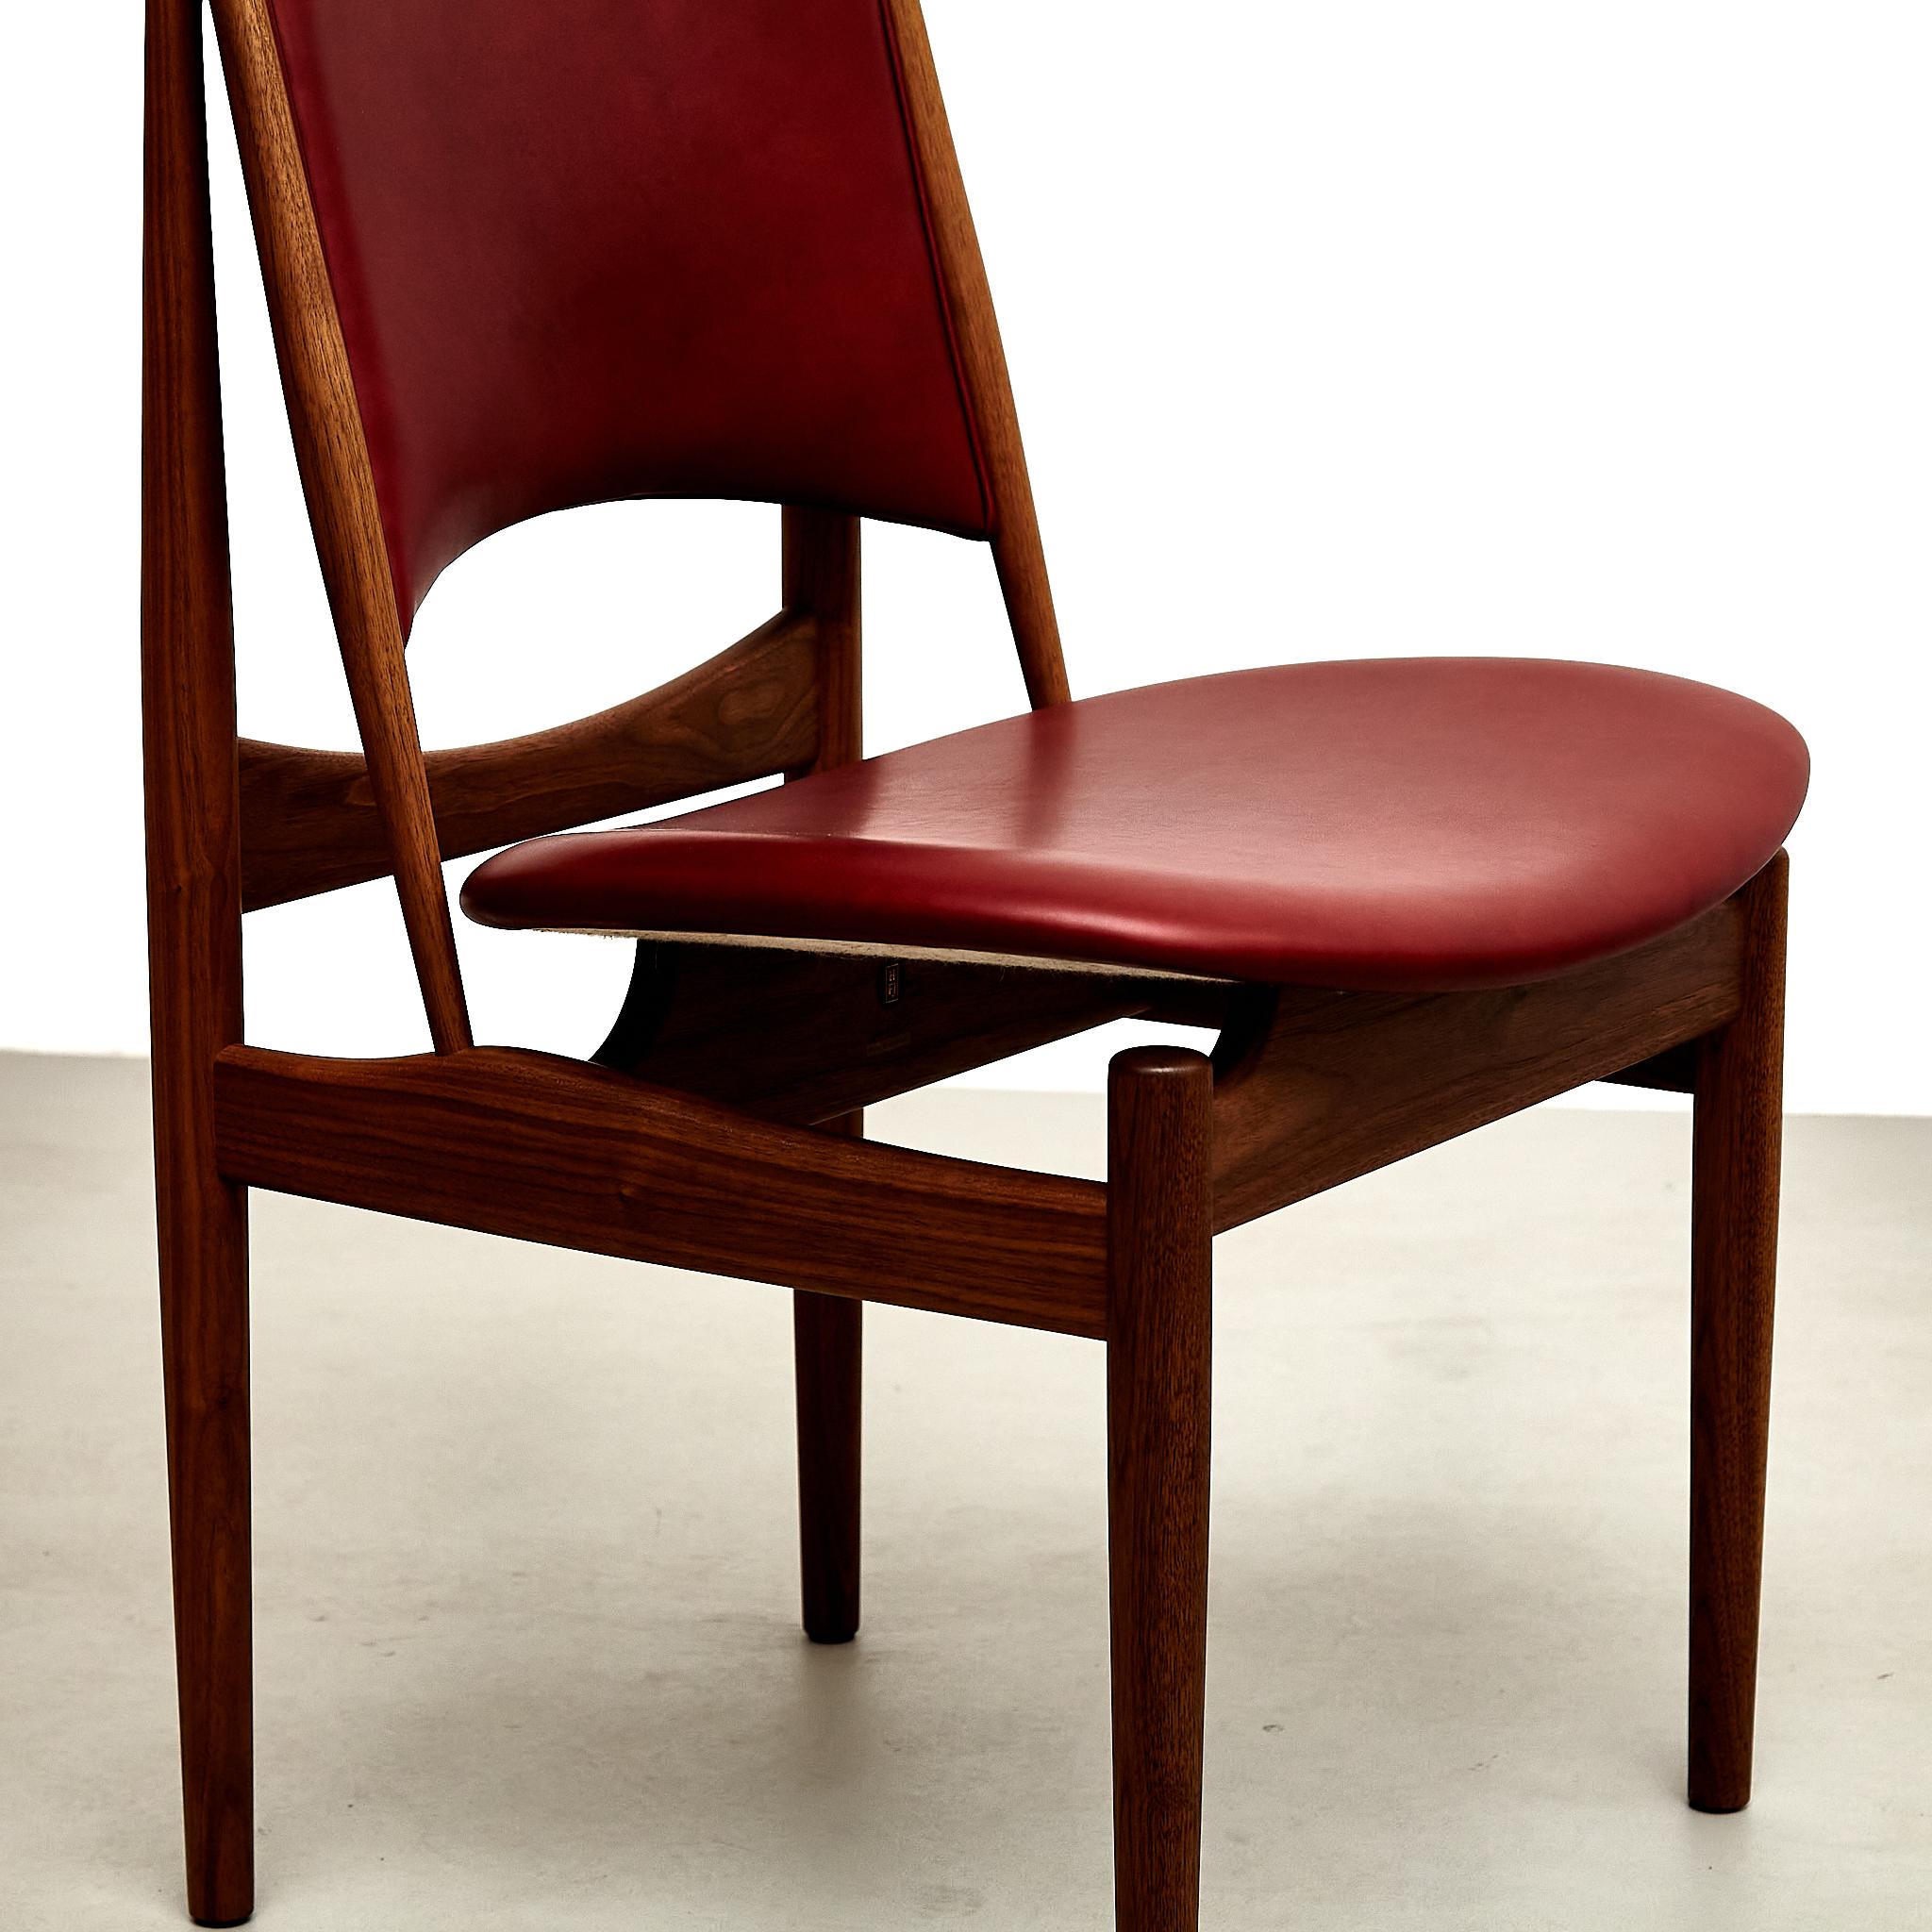 Finn Juhl Egyptian Chair in Walnut Wood and Dark Red Leather For Sale 6